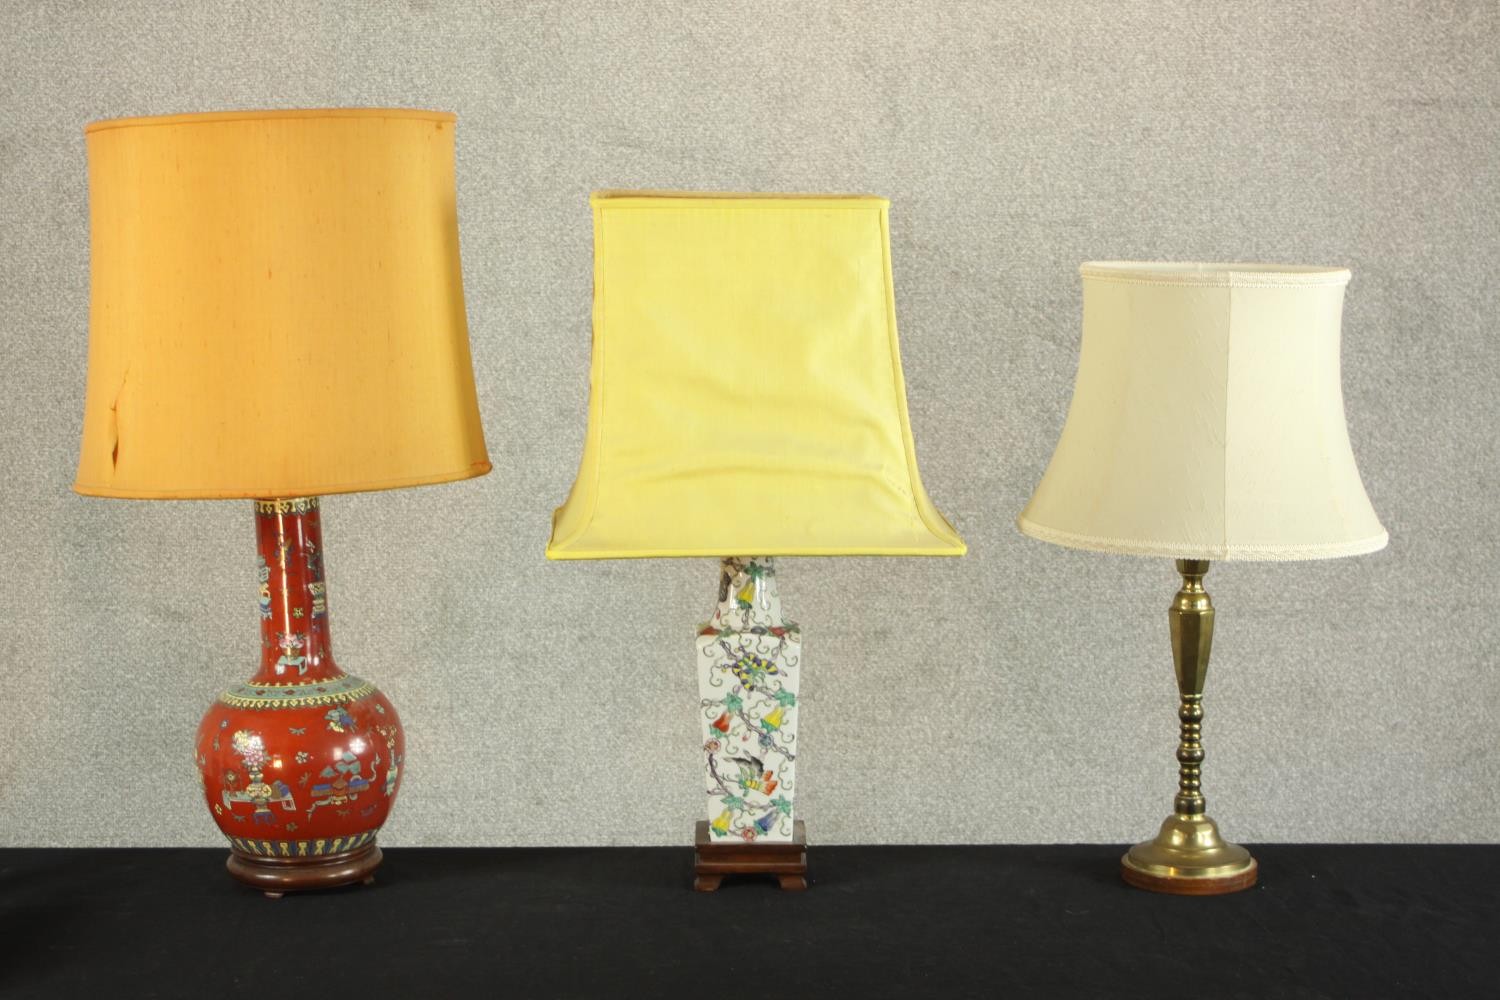 Three 20th century table lamps, including two Chinese hand painted porcelain vase design lamps,